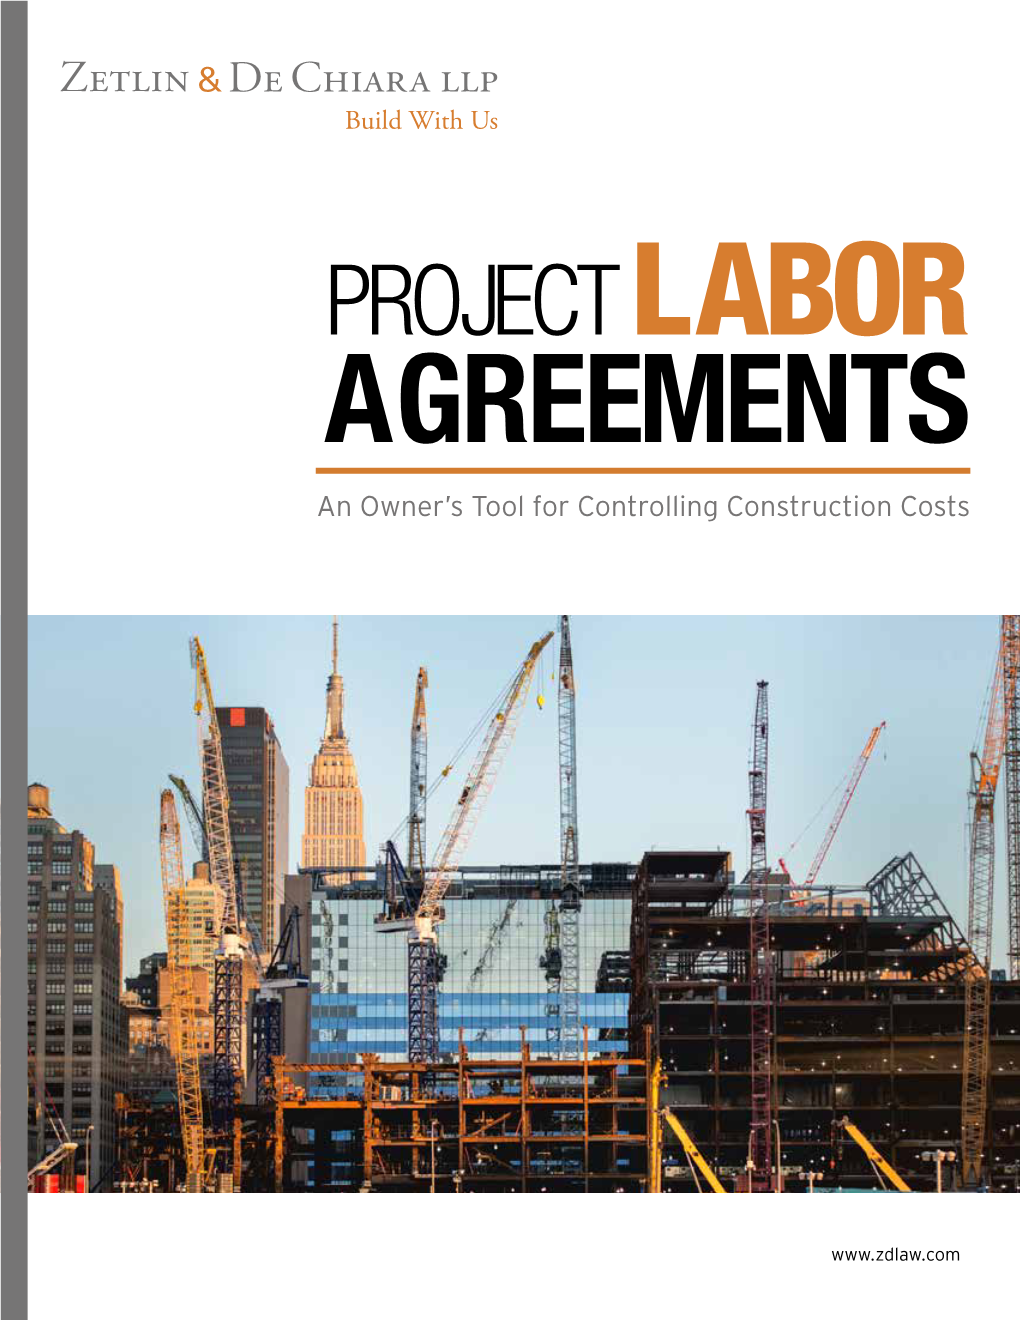 What Is a Project Labor Agreement (Pla)?